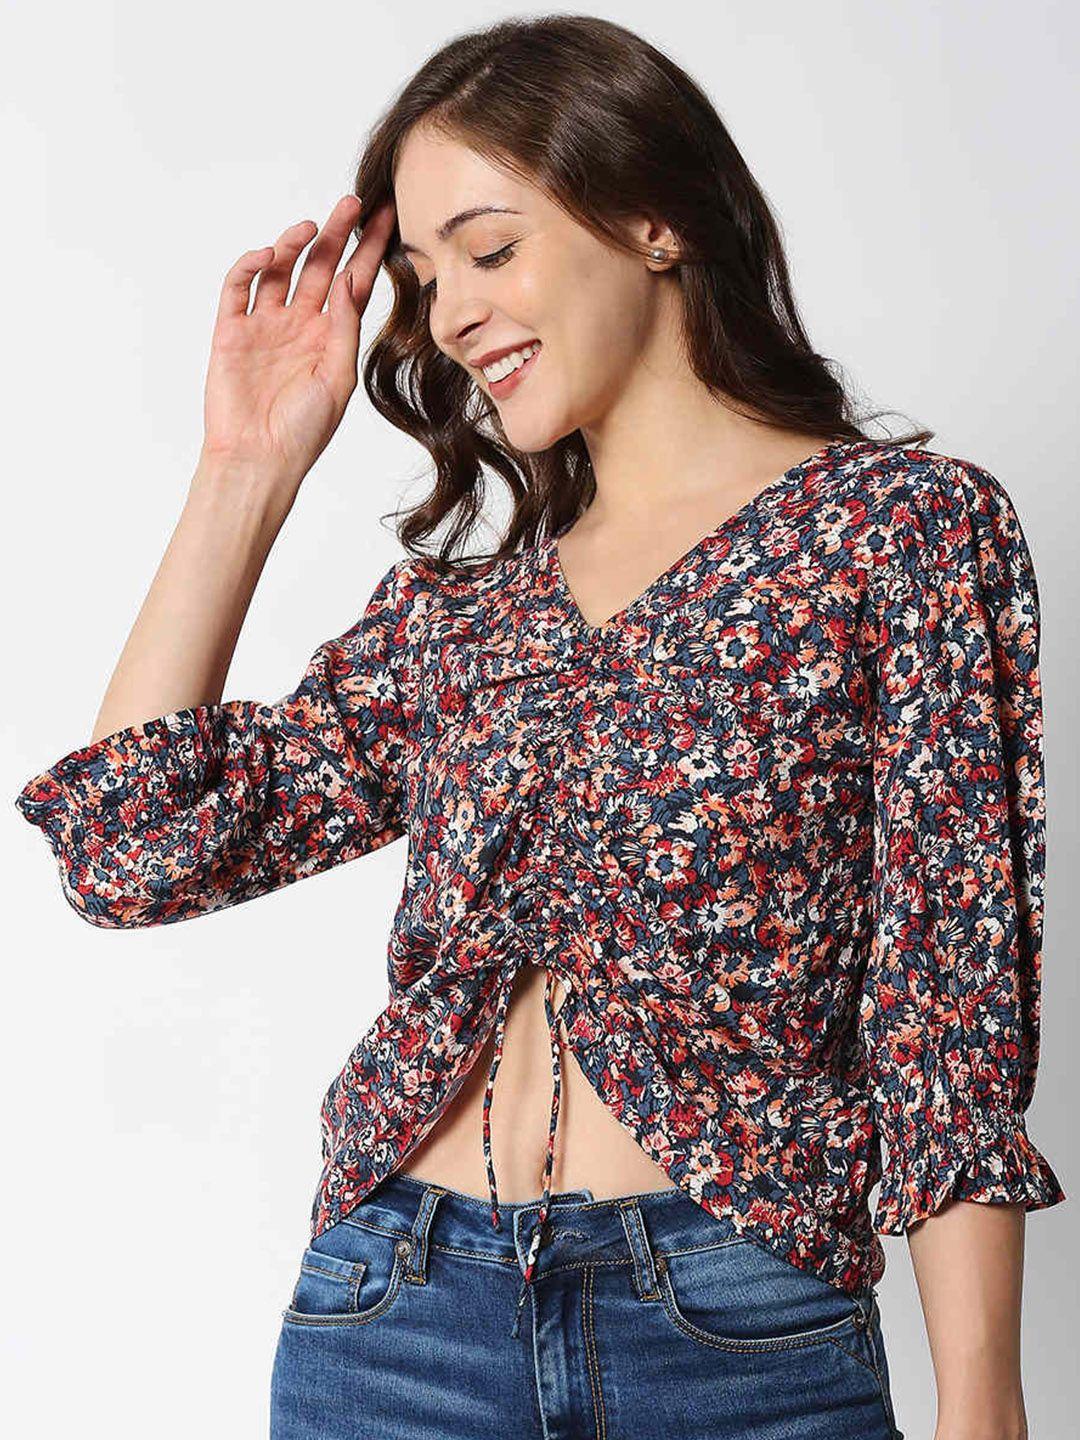 pepe-jeans-women-red-floral-print-crop-top